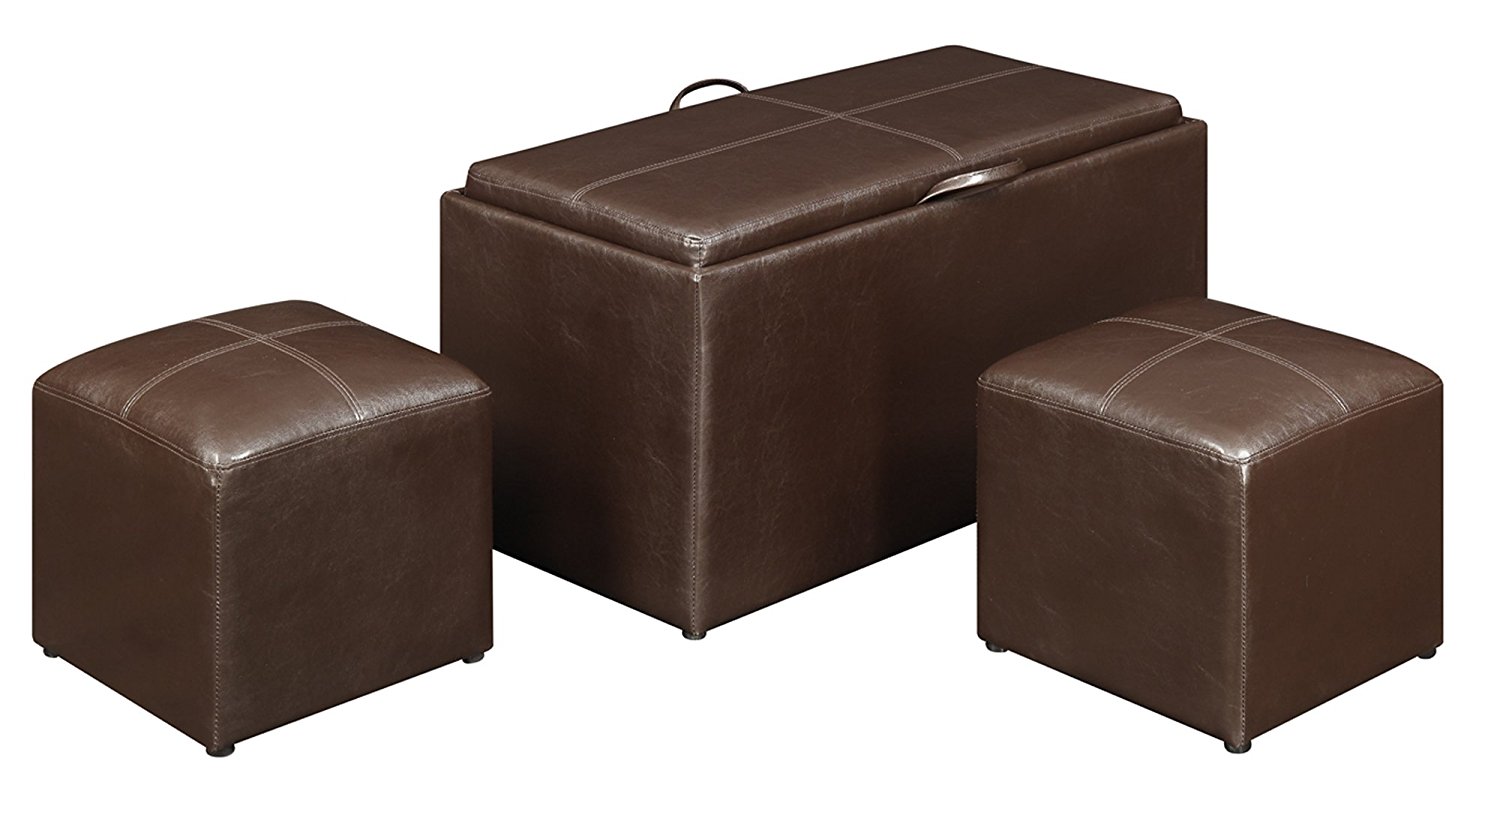 Convenience Concepts 143012 Sheridan Faux Leather Storage Bench with 2 Side Ottomans, Dark Espresso